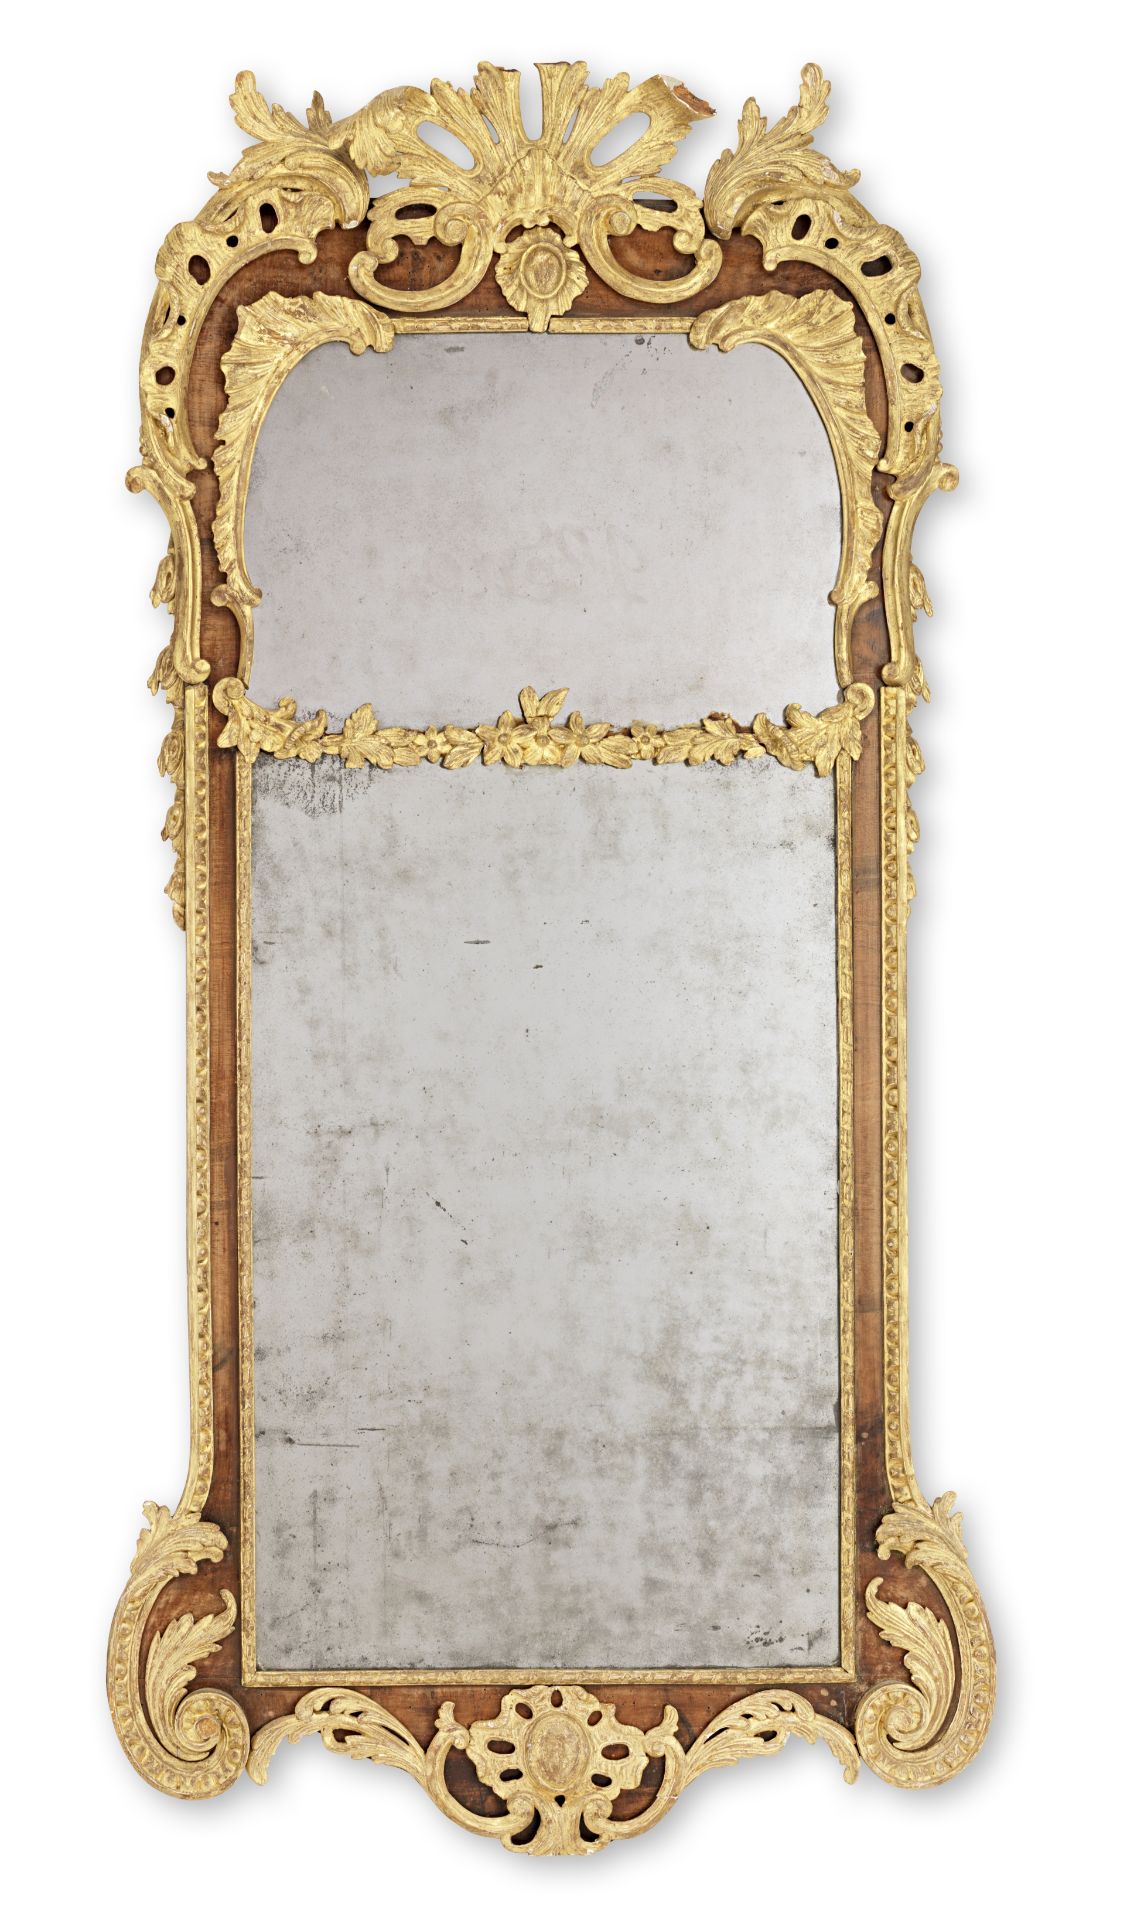 A 19th century walnut and parcel gilt mirror in the George II style